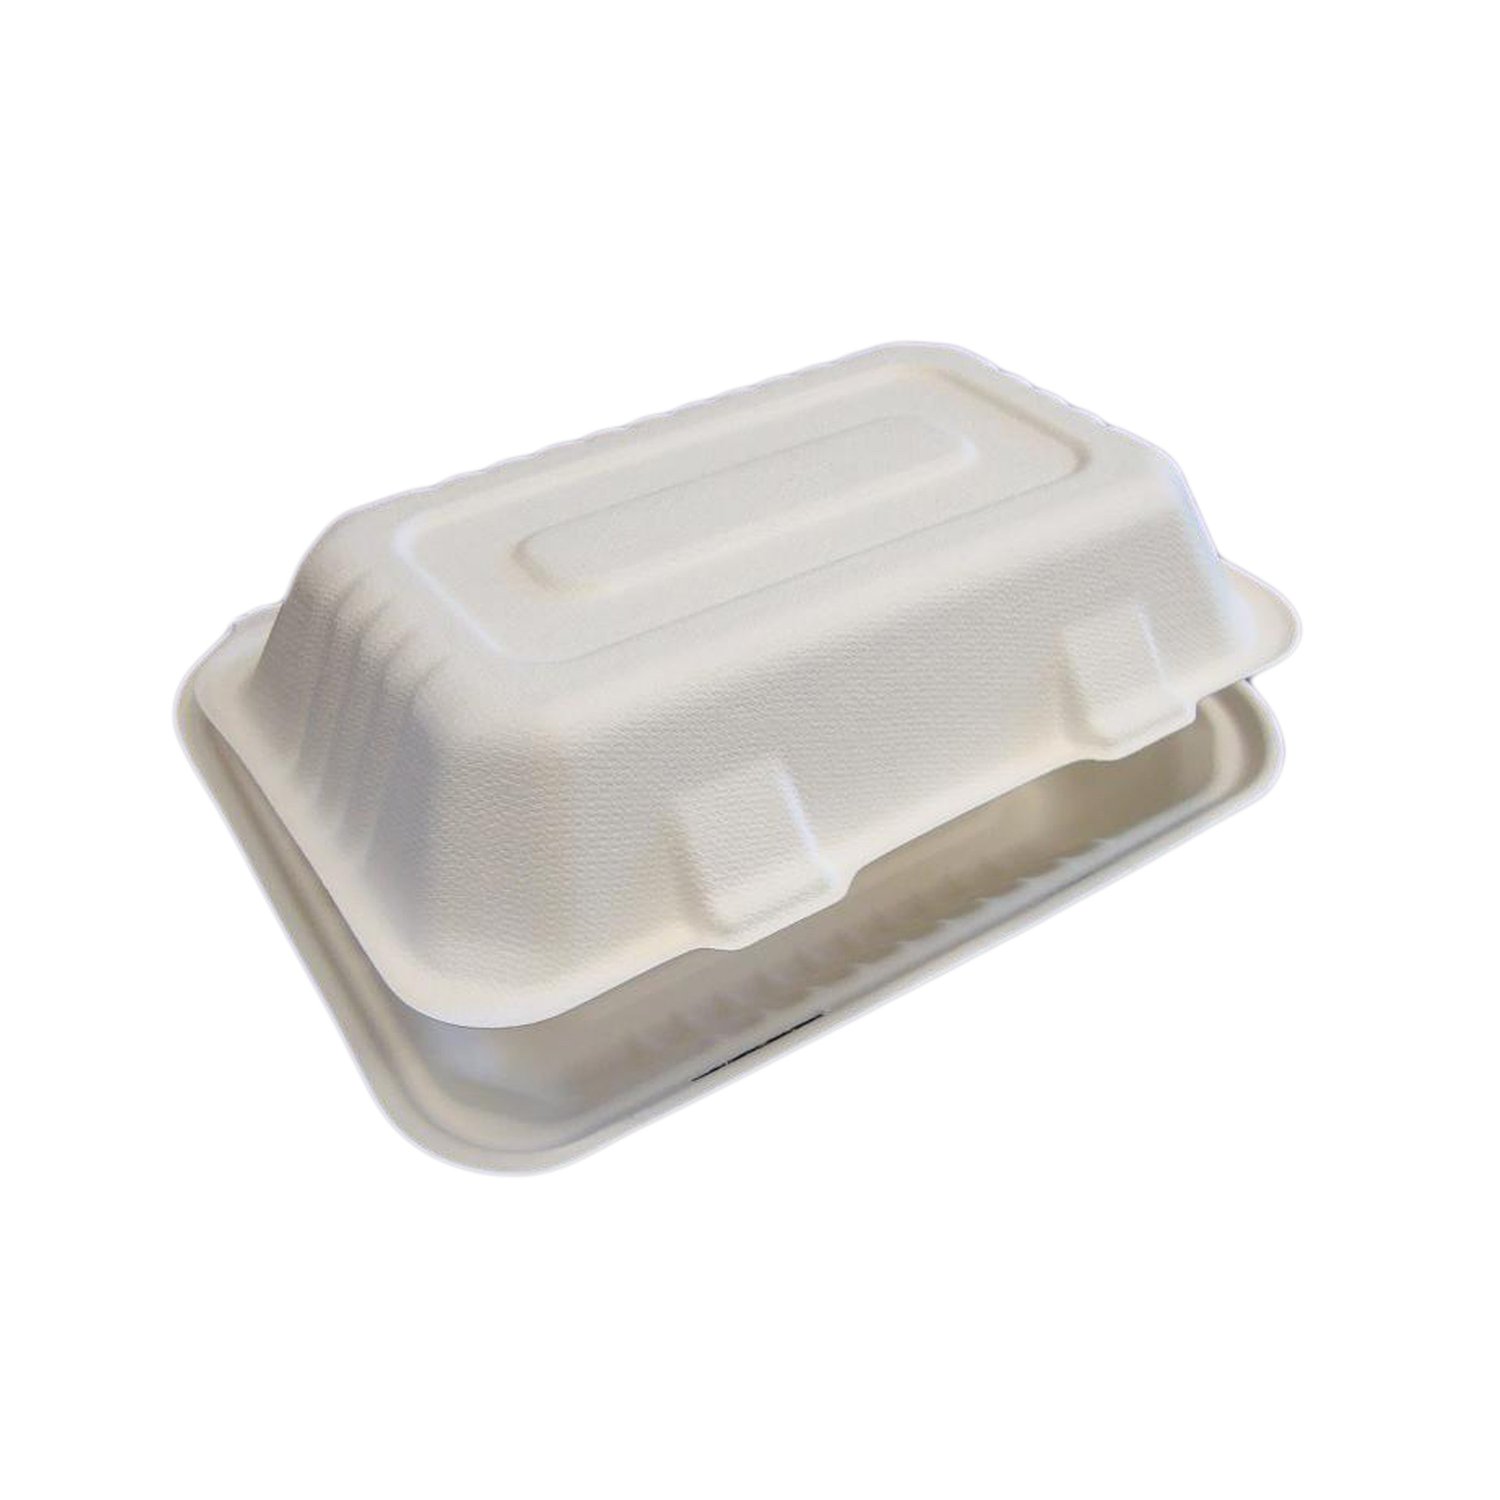 6x6x3 Eco-Friendly Disposable Takeout Box / Burger Box (500 Count)